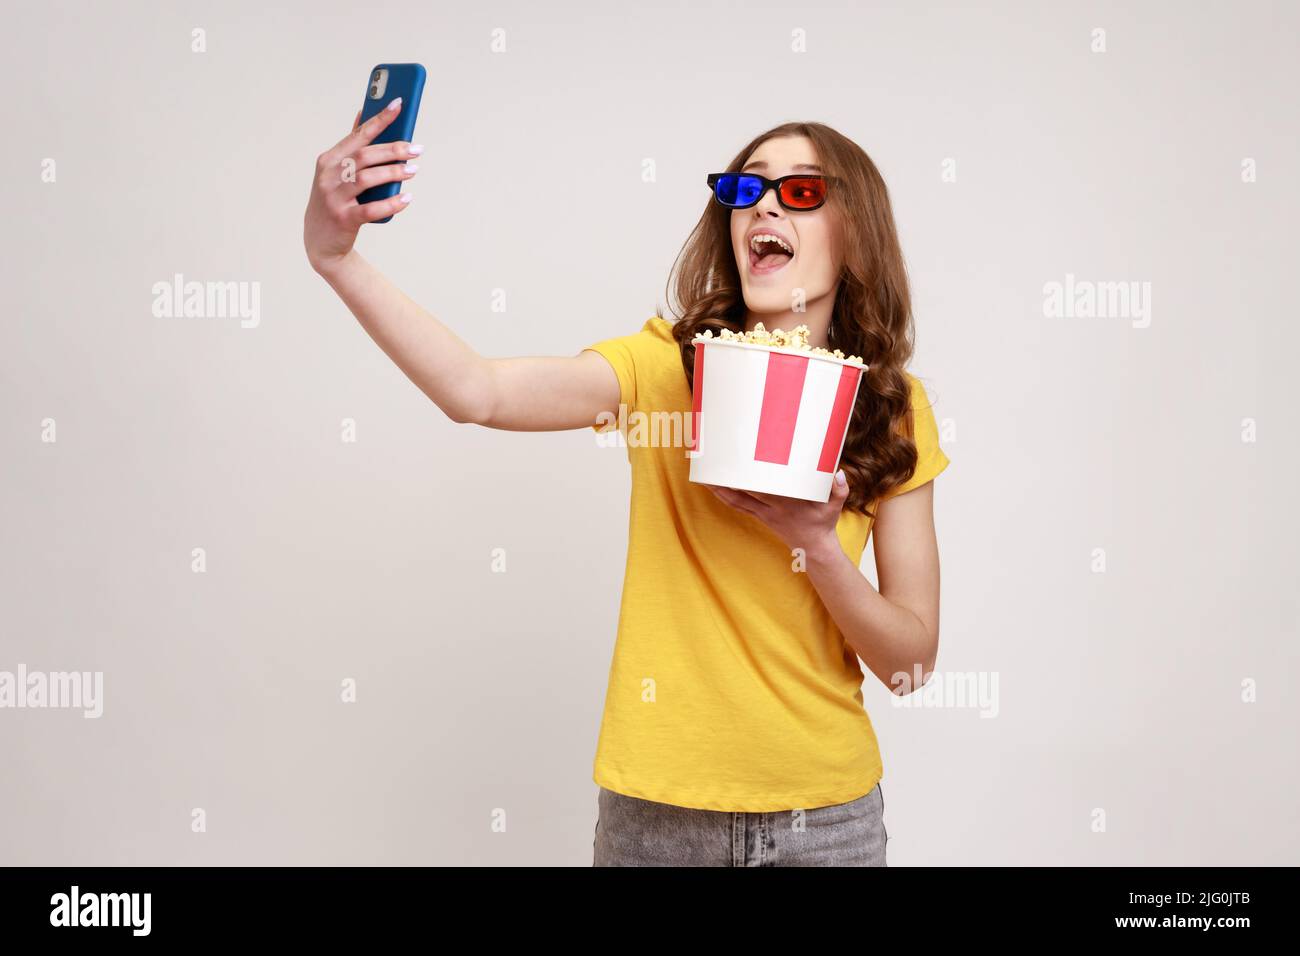 Young funny happy excited teenager girl wearing yellow casual style T-shirt holding takeaway popcorn bucket, making selfie or broadcasting livestream. Indoor studio shot isolated on gray background. Stock Photo